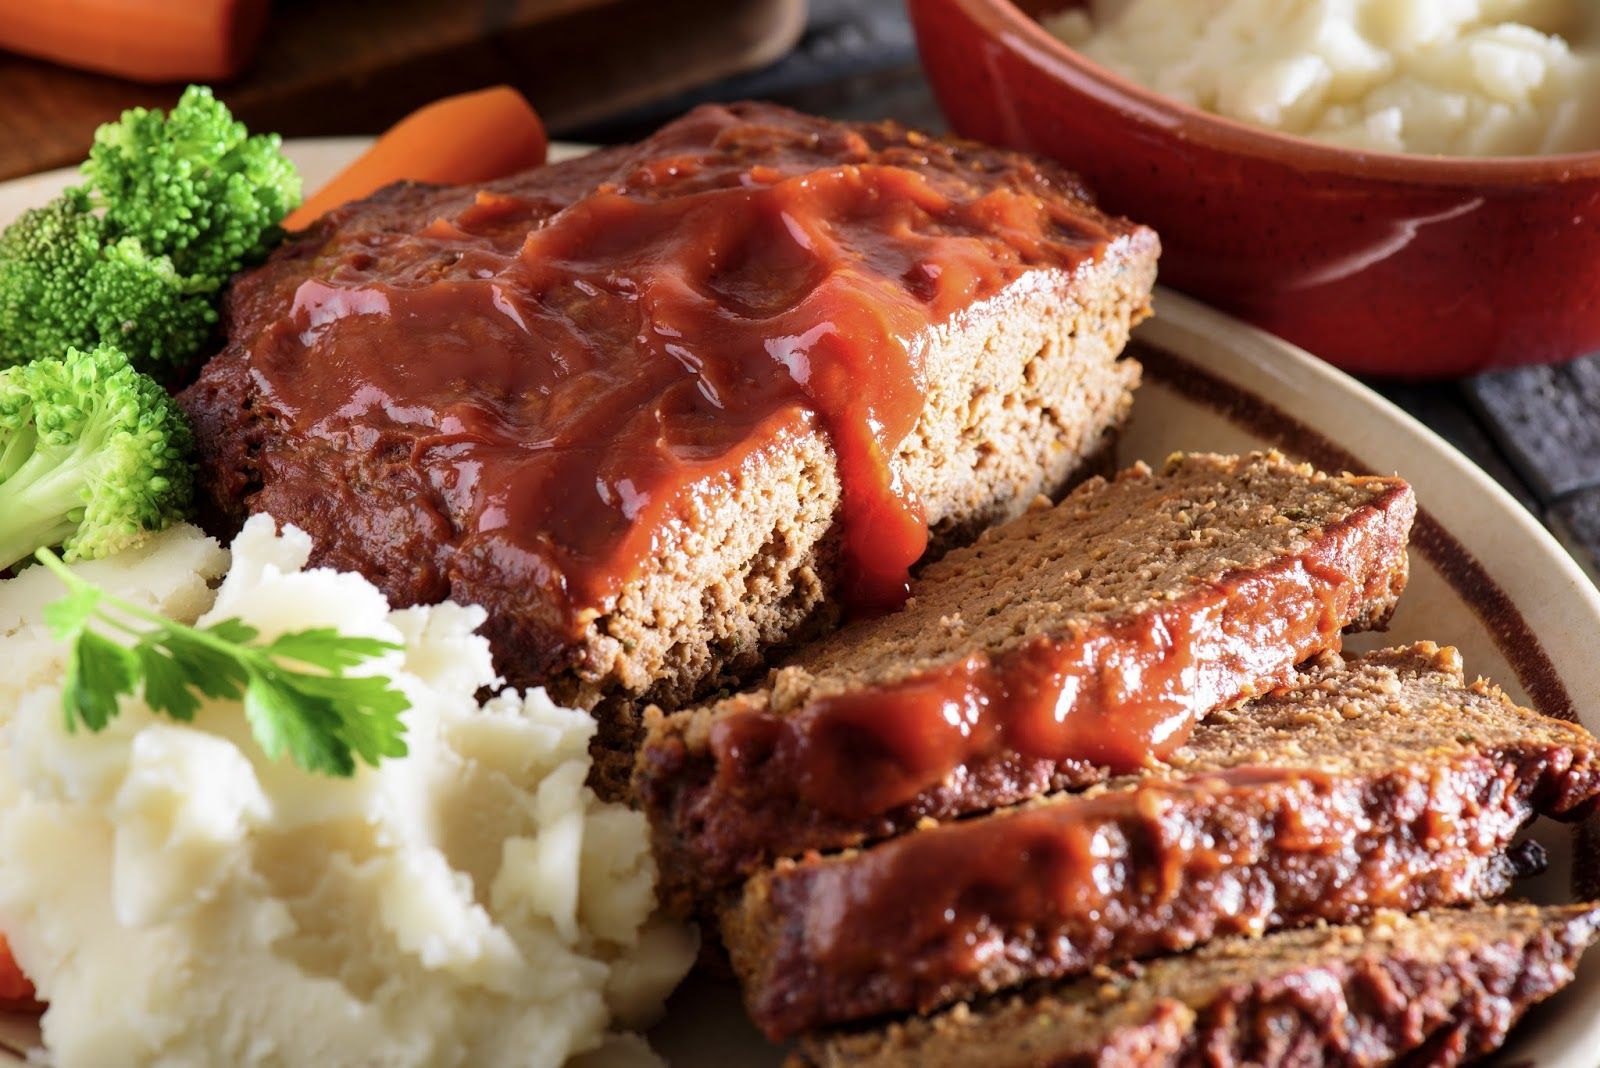 Say “Yuck” Or “Yum” to These Foods and We’ll Determine Your Exact Age Meatloaf